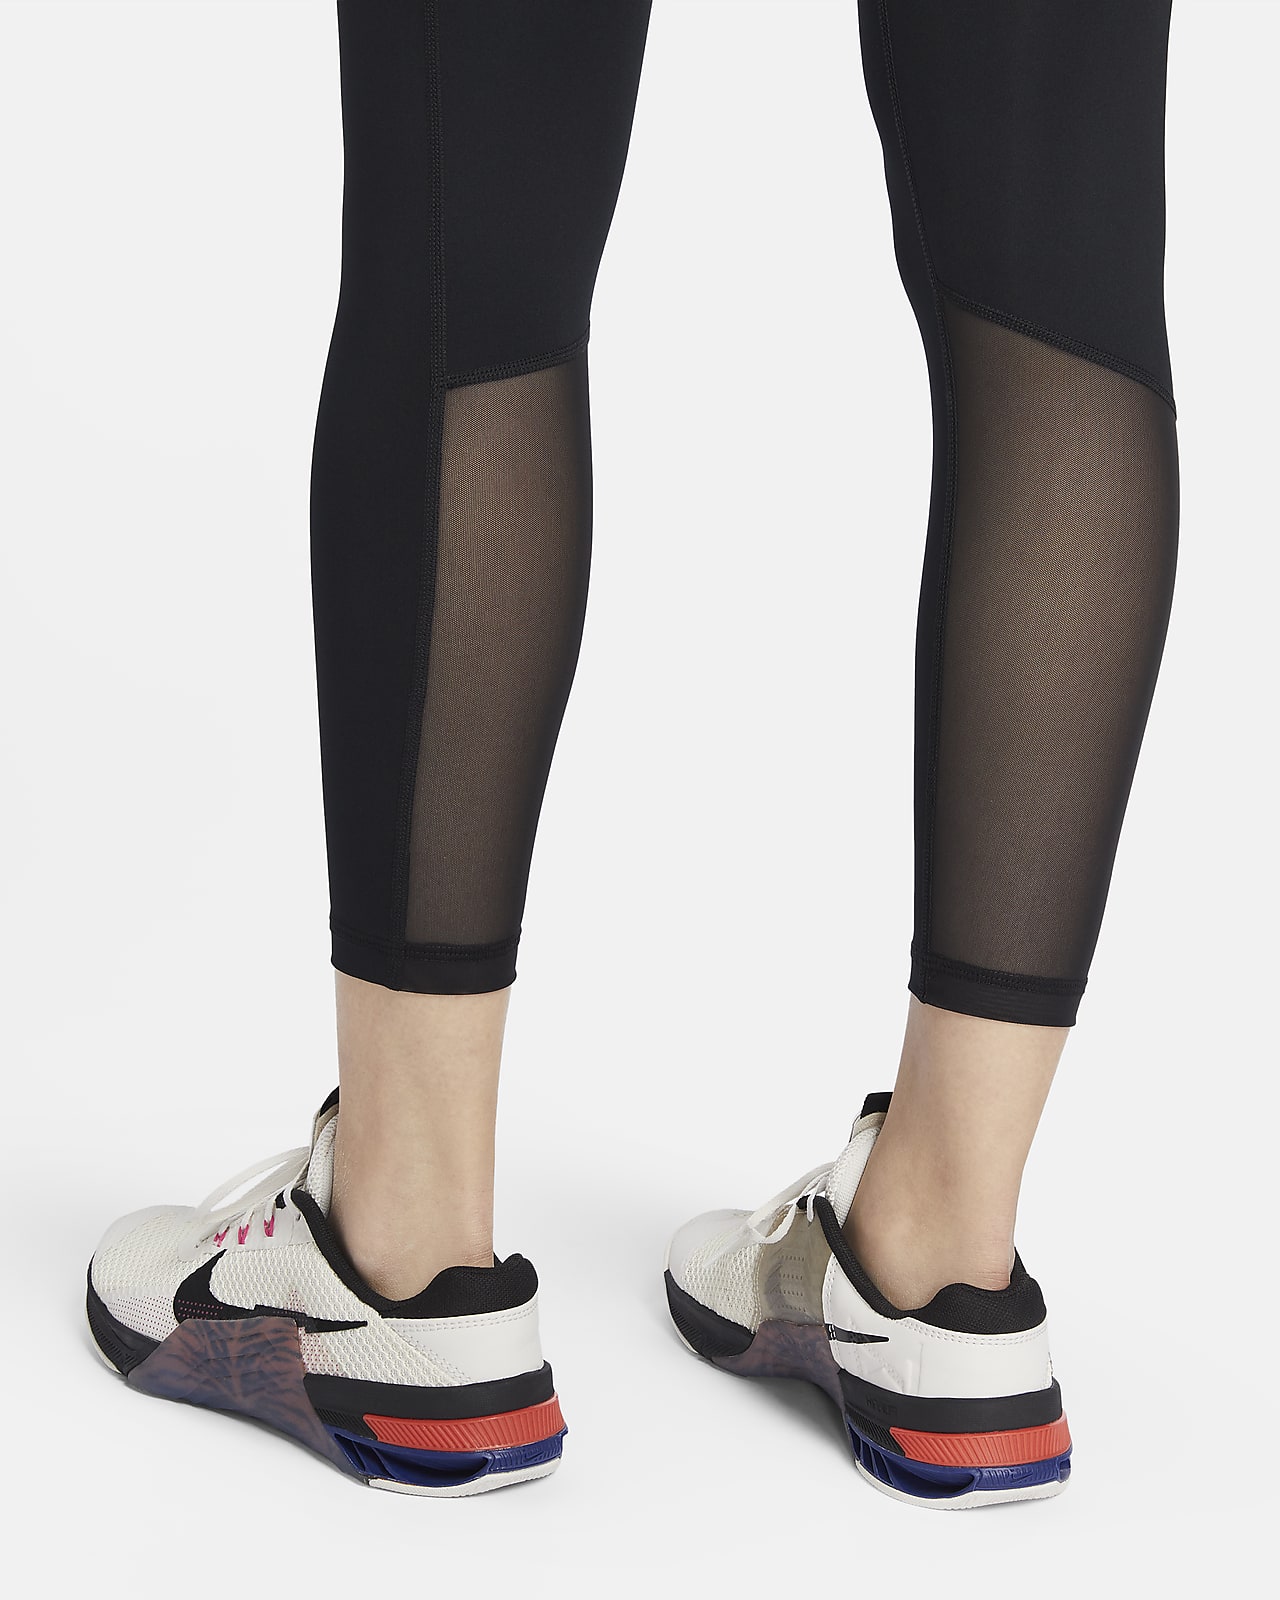 Nike Pro 365 Women's Mid-Rise 7/8 Leggings with Pockets. Nike IN